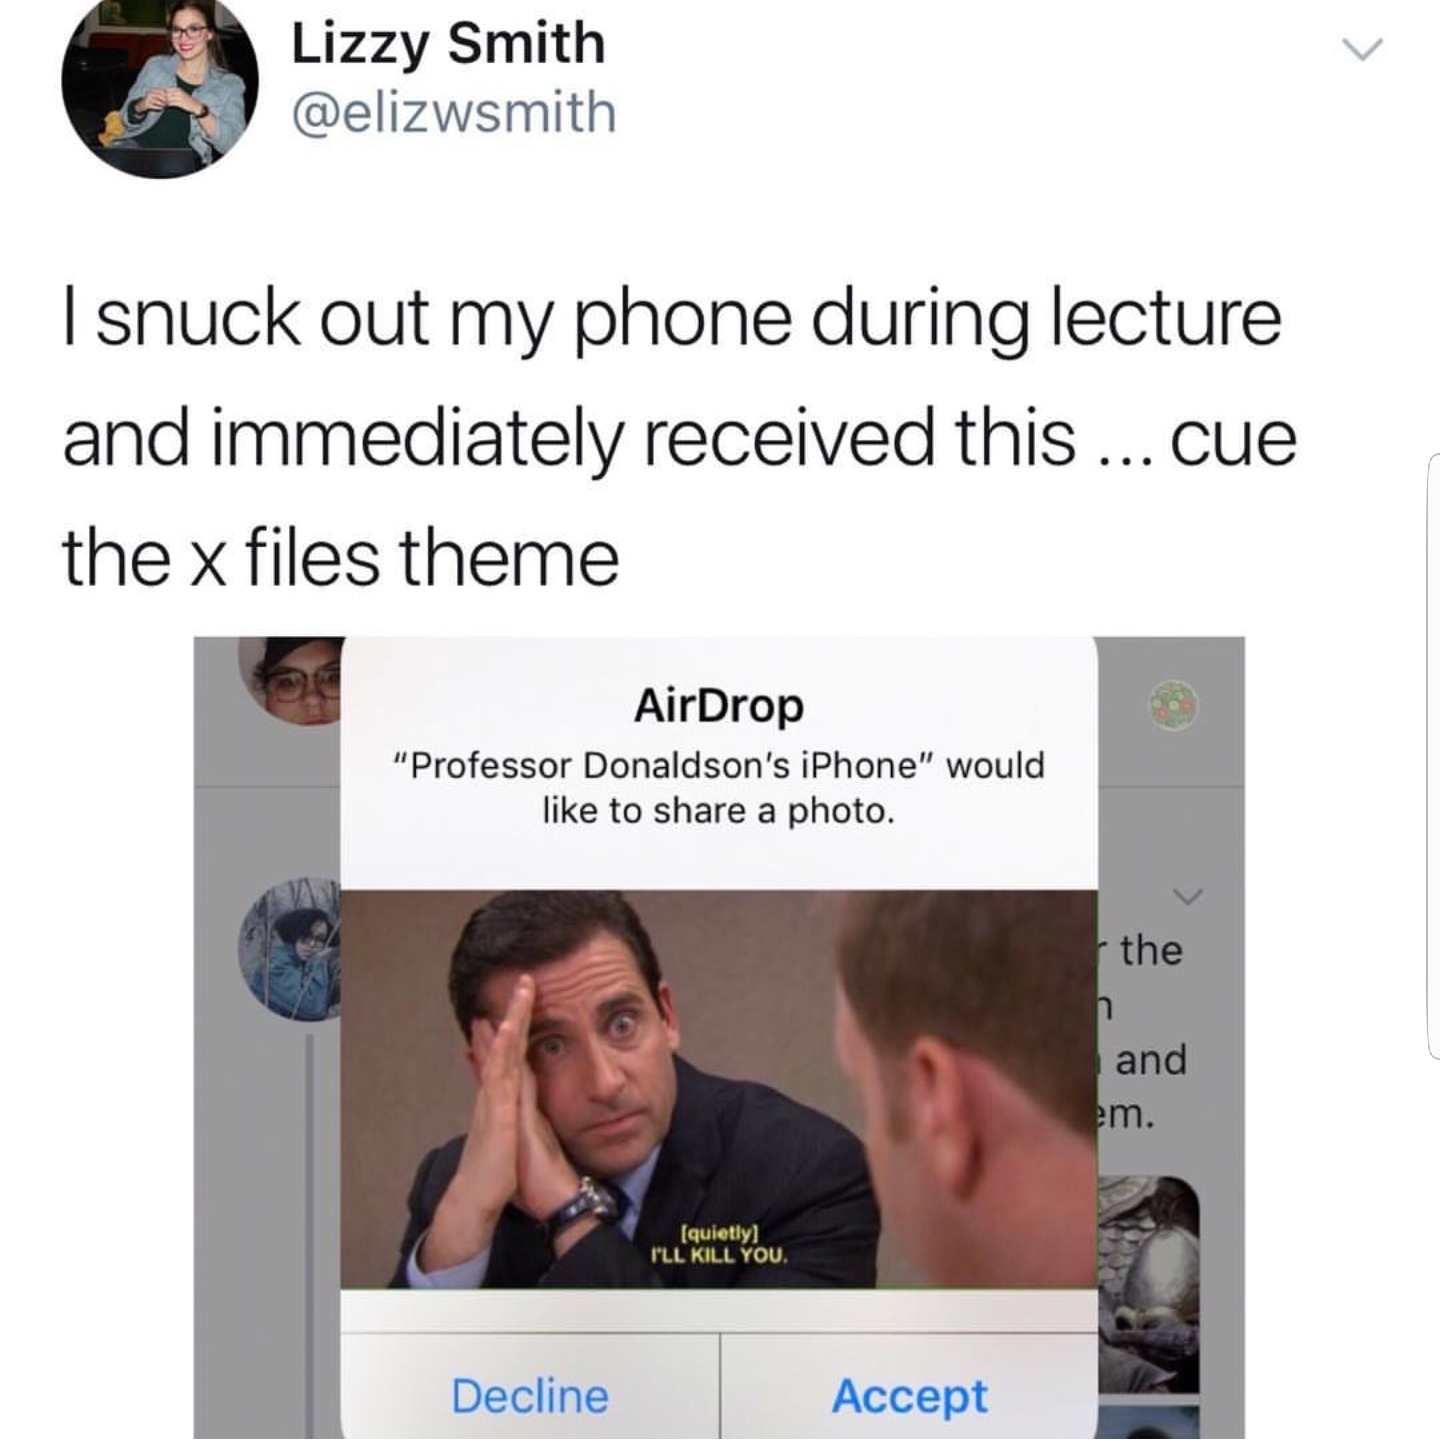 memes funny tweets - Lizzy Smith Isnuck out my phone during lecture and immediately received this ... cue the x files theme AirDrop "Professor Donaldson's iPhone" would to a photo. and em. quietly I'Ll Kill You. Decline Accept